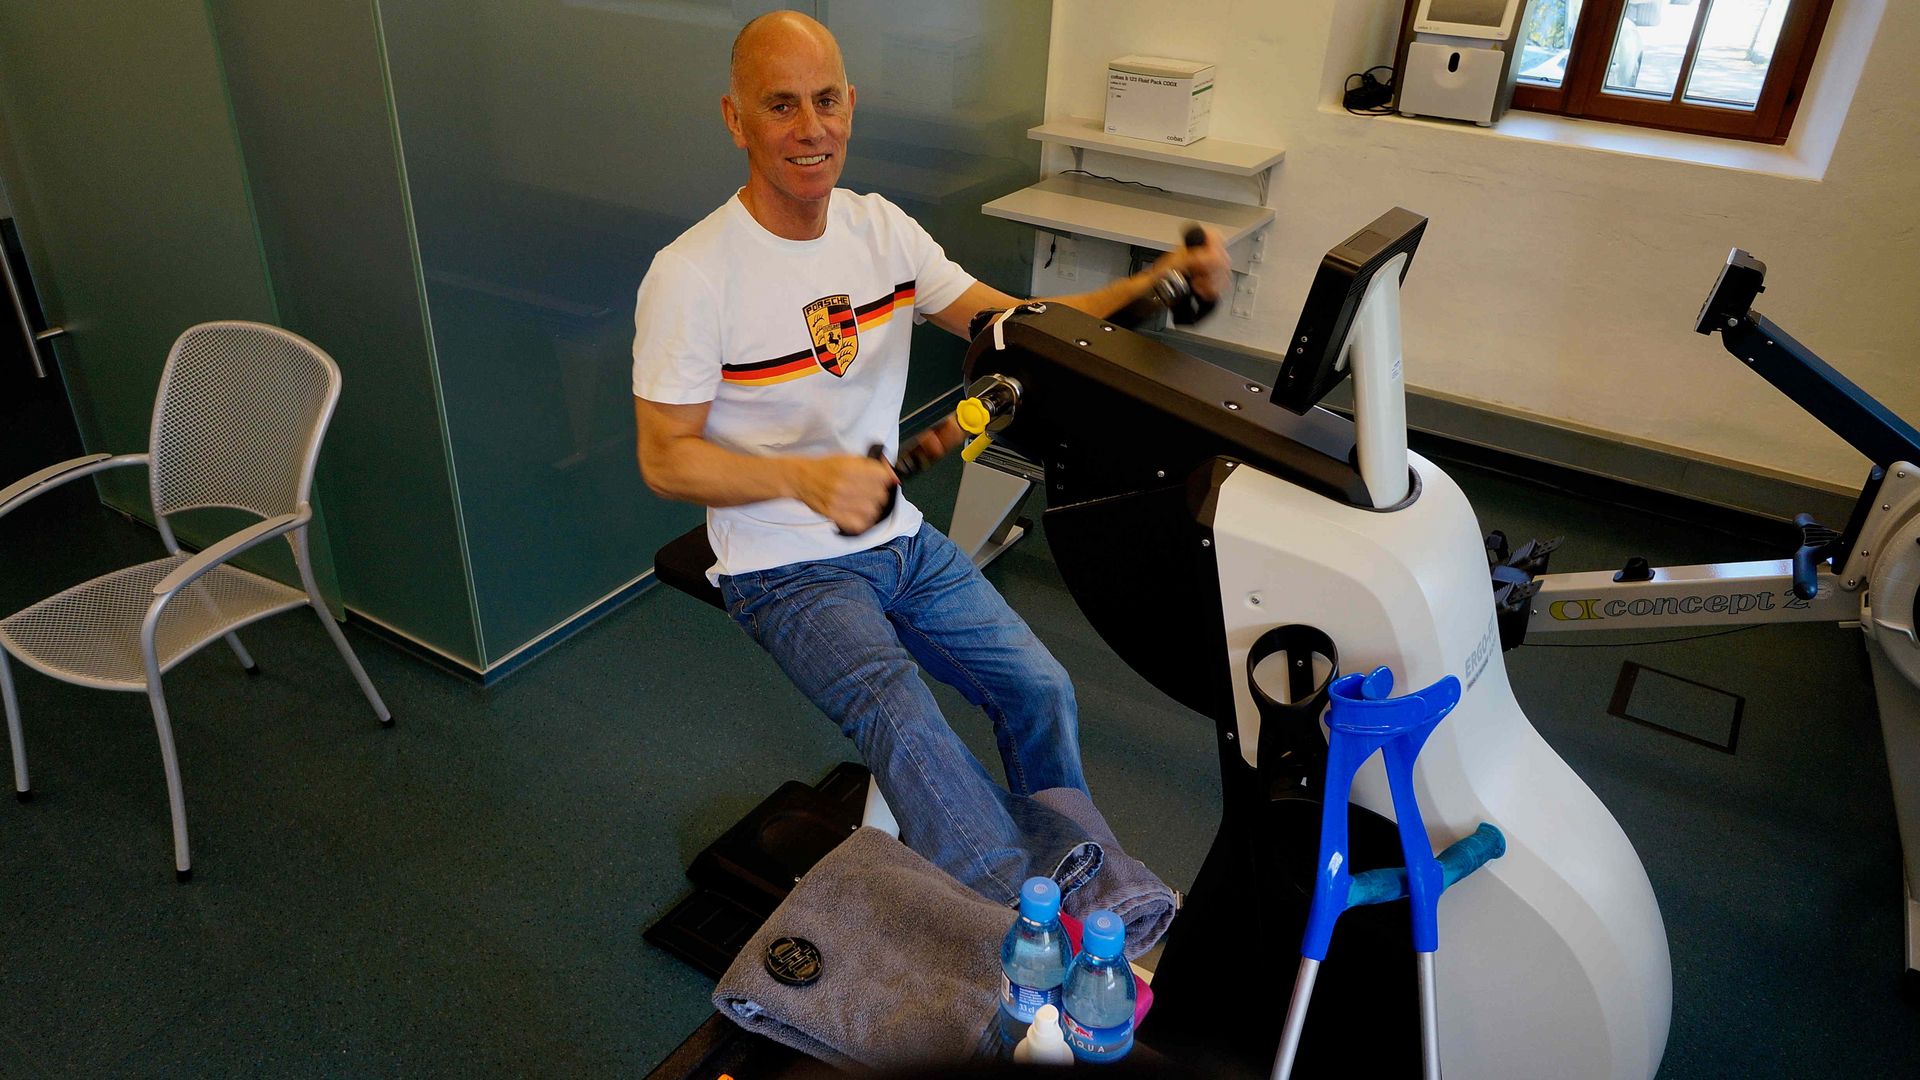 Second-hand ergometer test after the accident: +35% increase in strength!